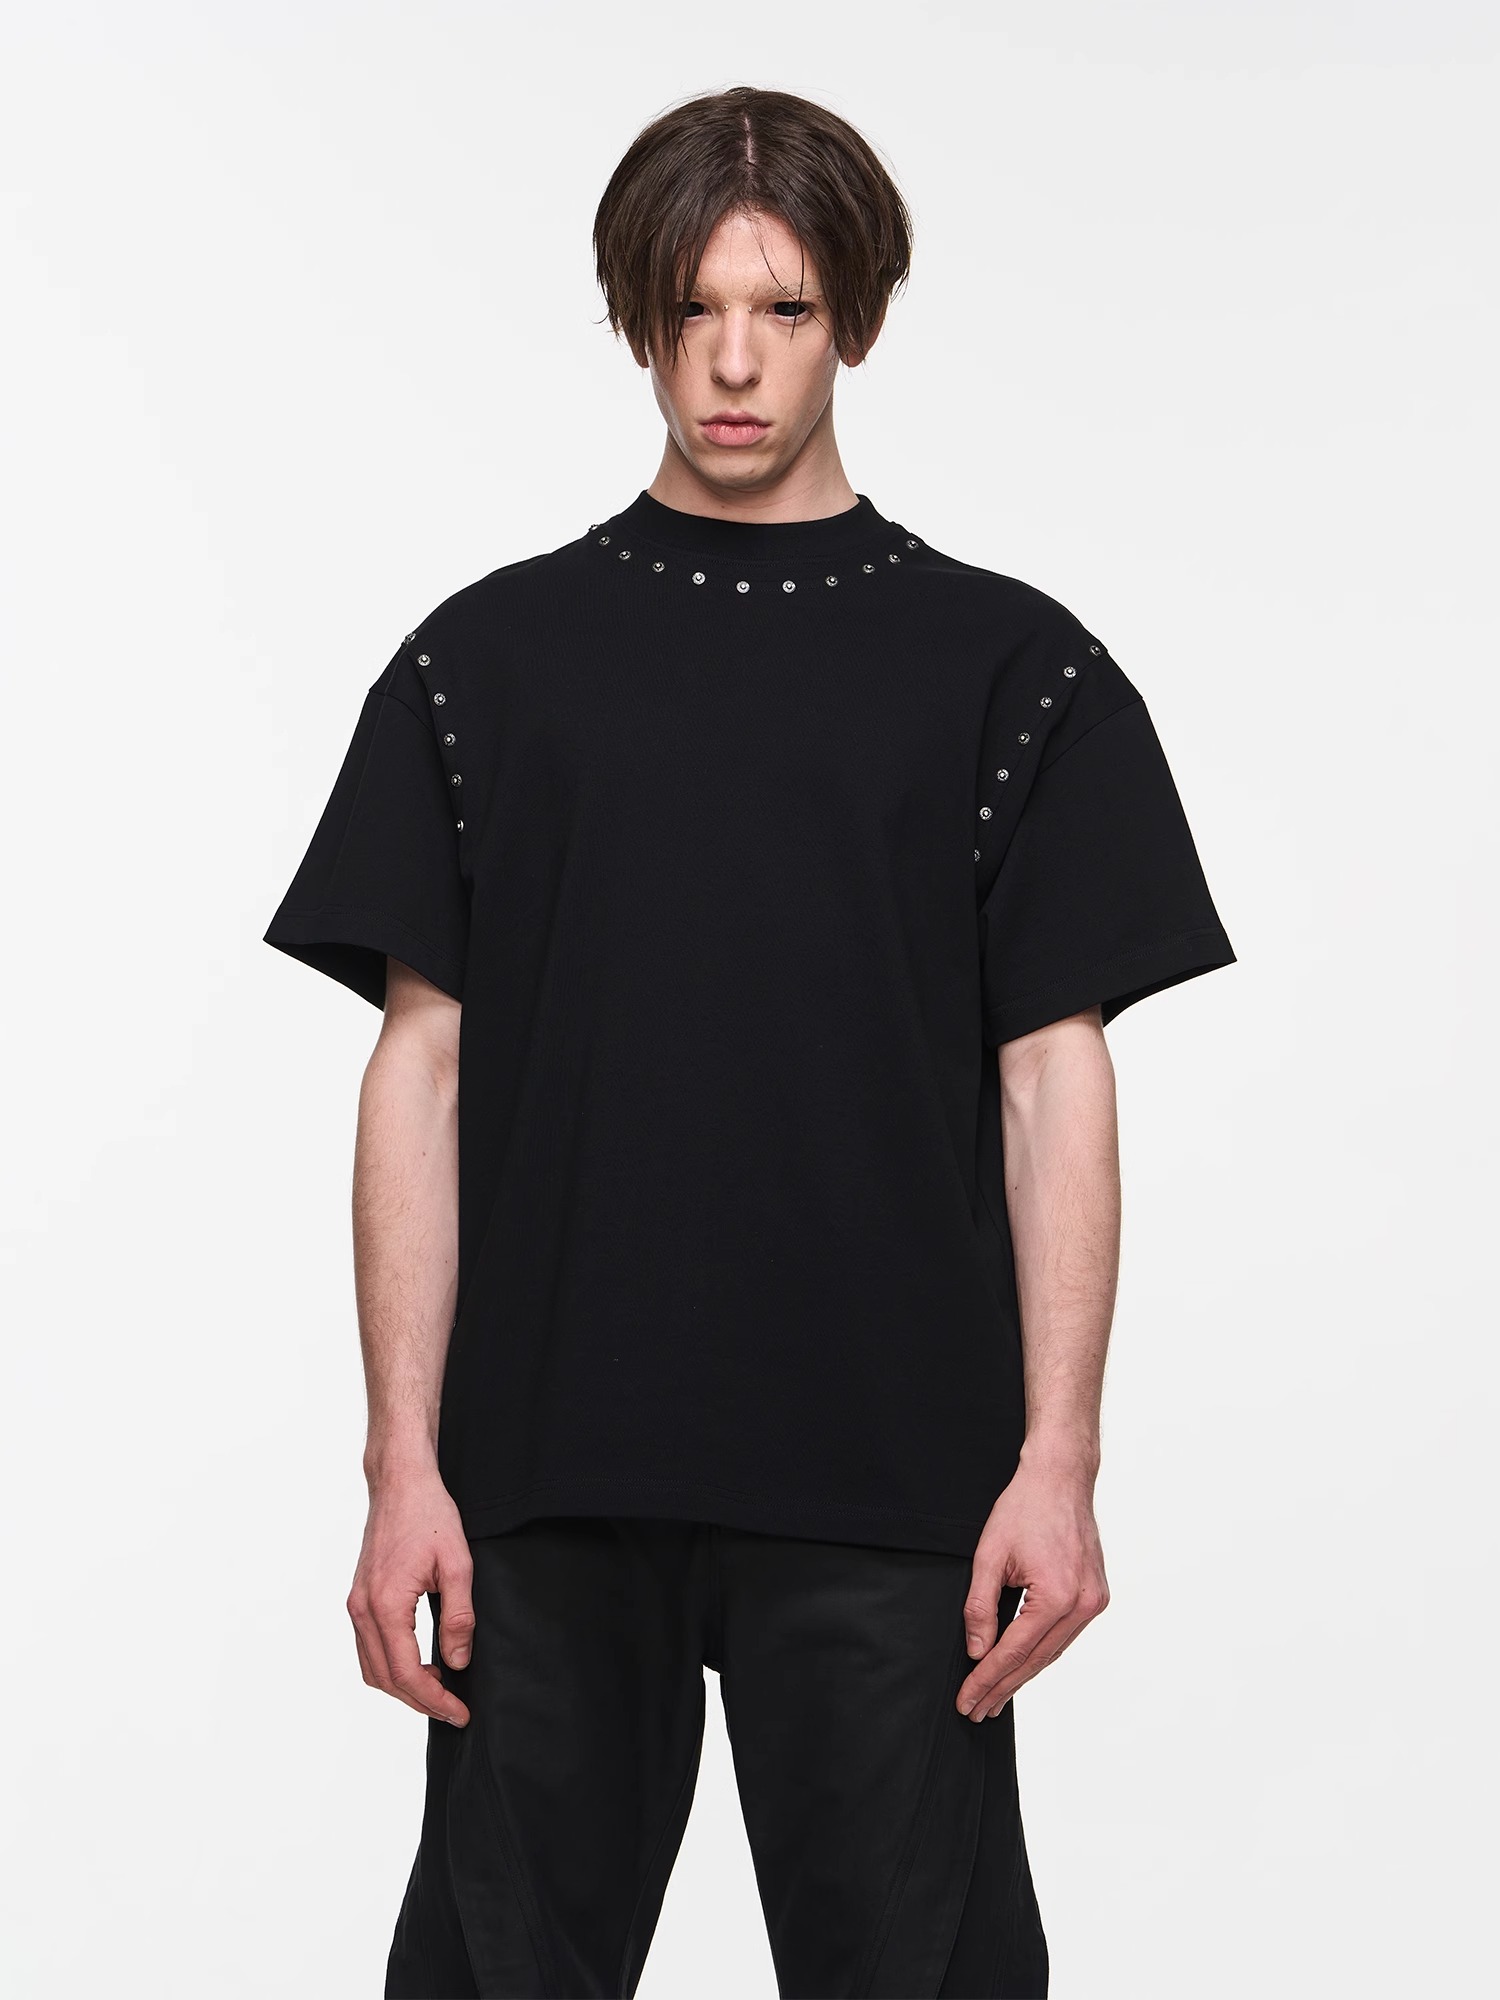 BLINDNOPLAN 24SS Metal Studded Decorated T-shirt